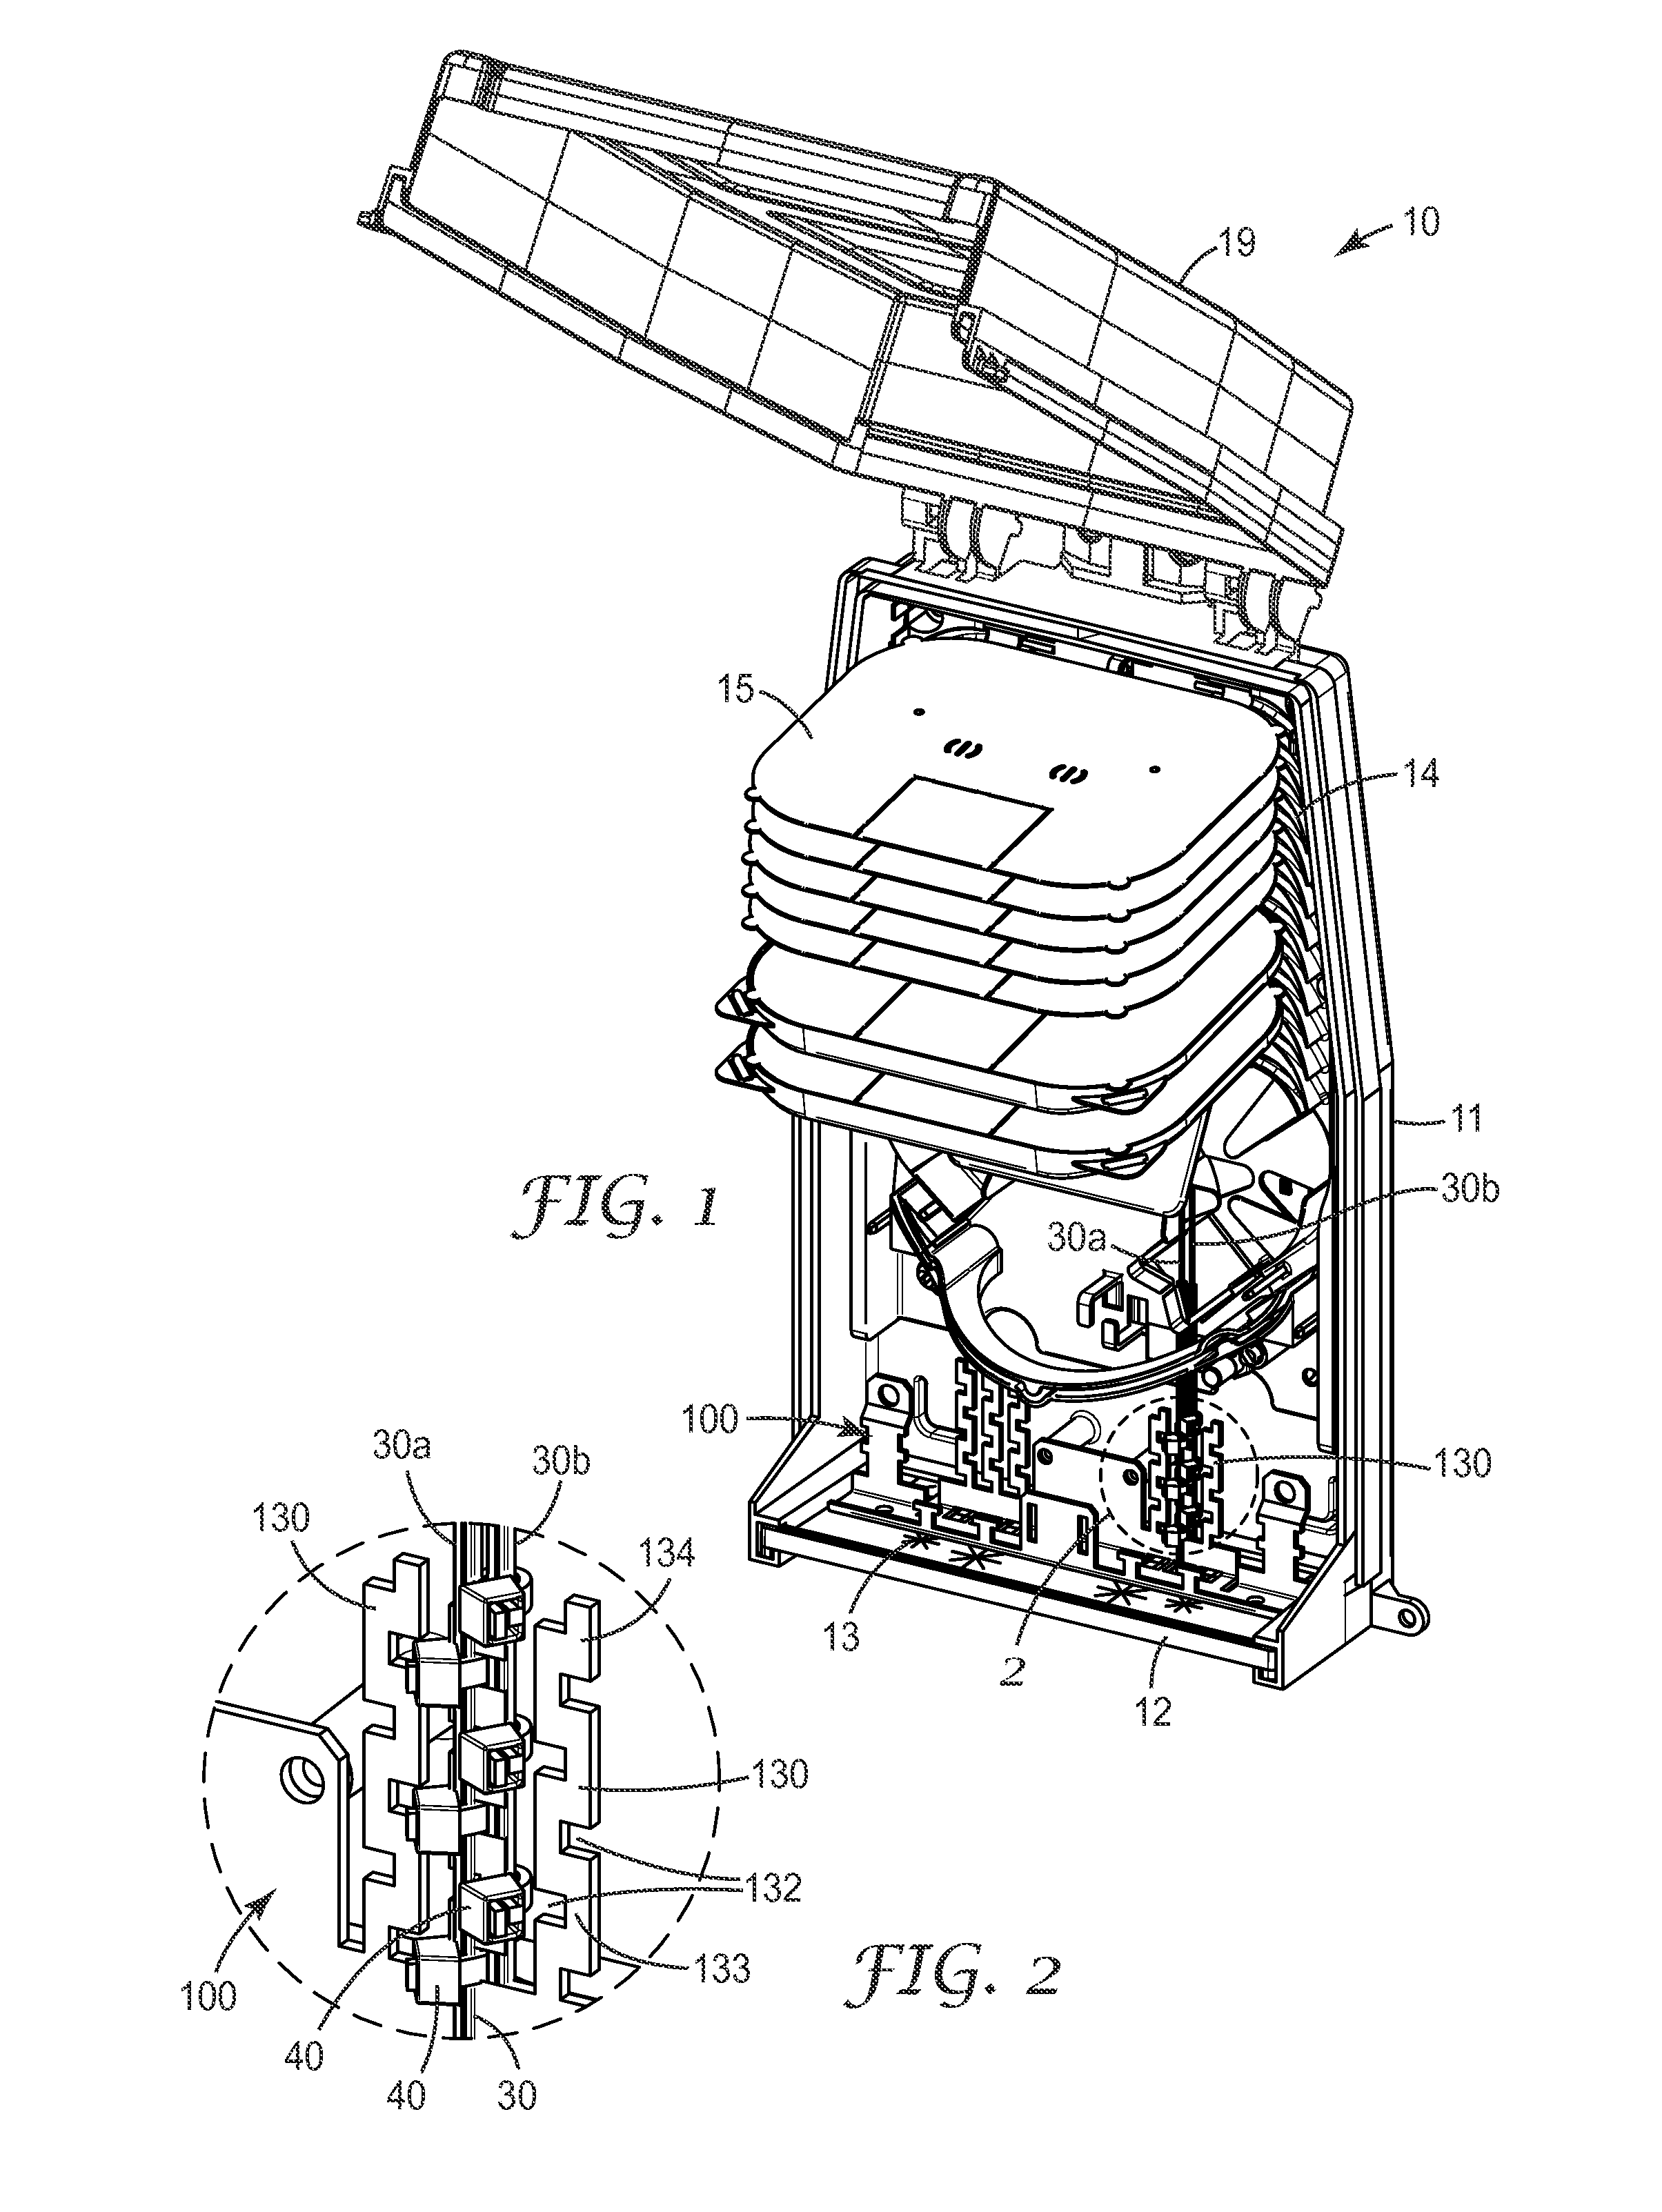 Strain relief device for low friction drop cable